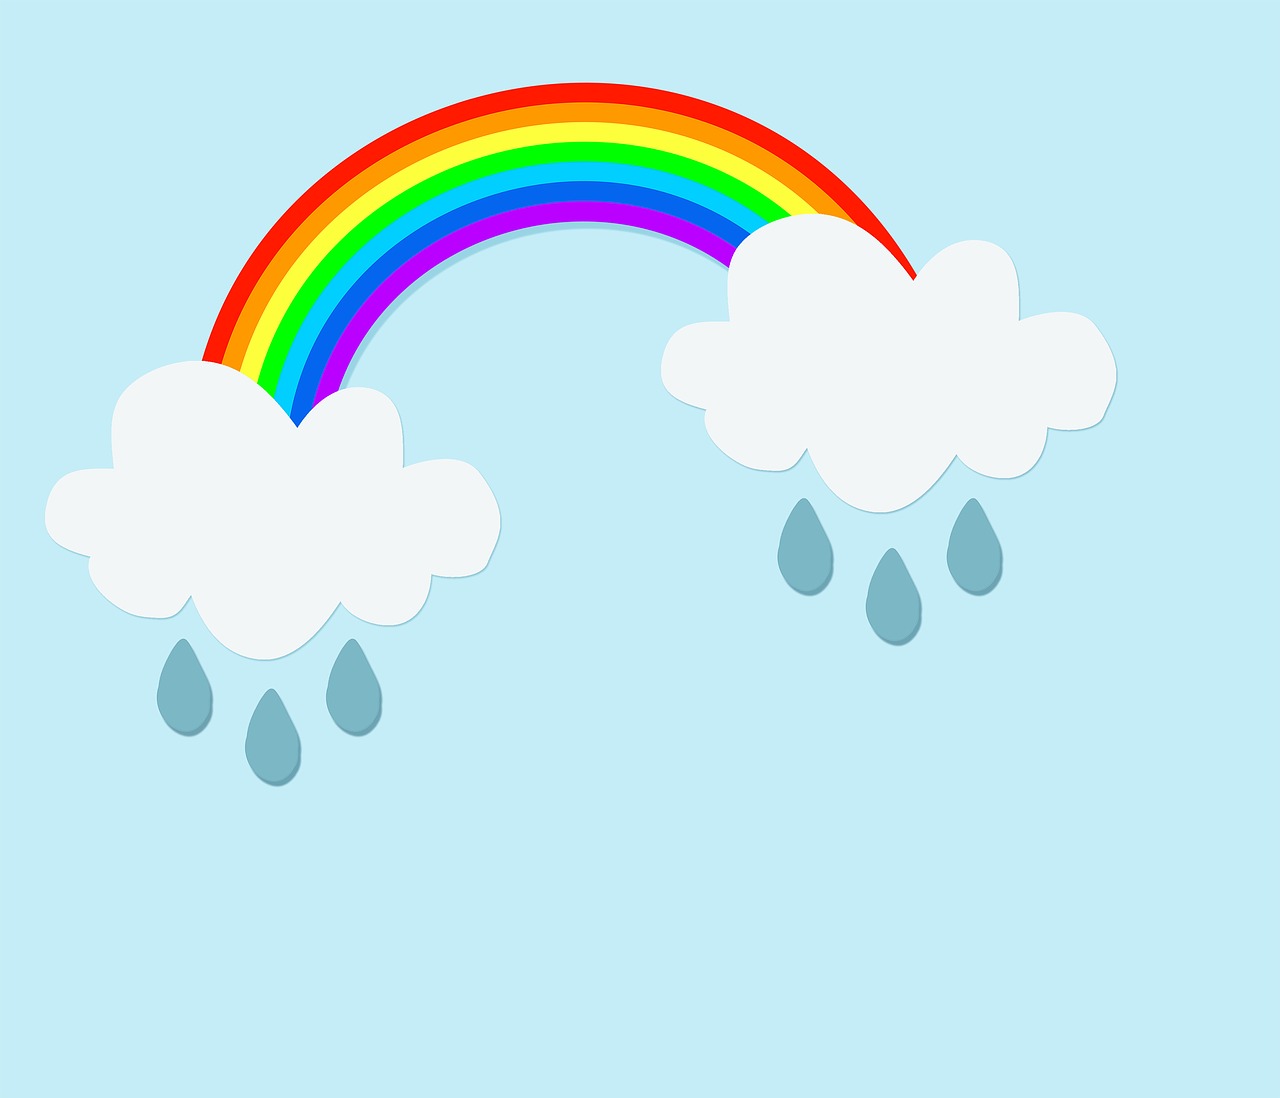 a rainbow and some clouds in a blue sky, an illustration of, raindrop, simple and clean illustration, paper, on a gray background